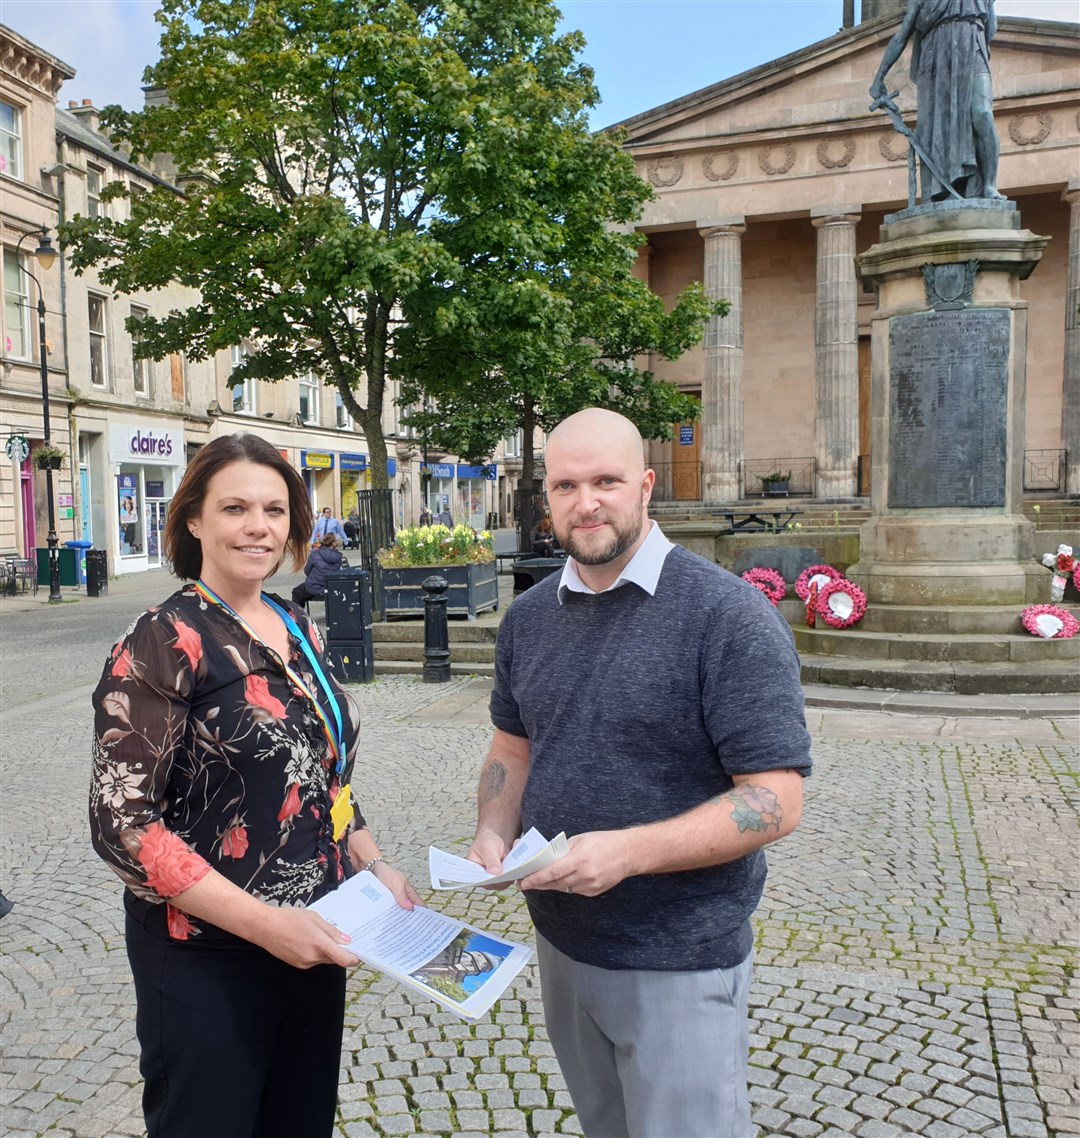 Louise Ballantyne, patient services manager, speaks to Lossiemouth resident Calum McKenzie during an earlier consultation event on Elgin High Street.